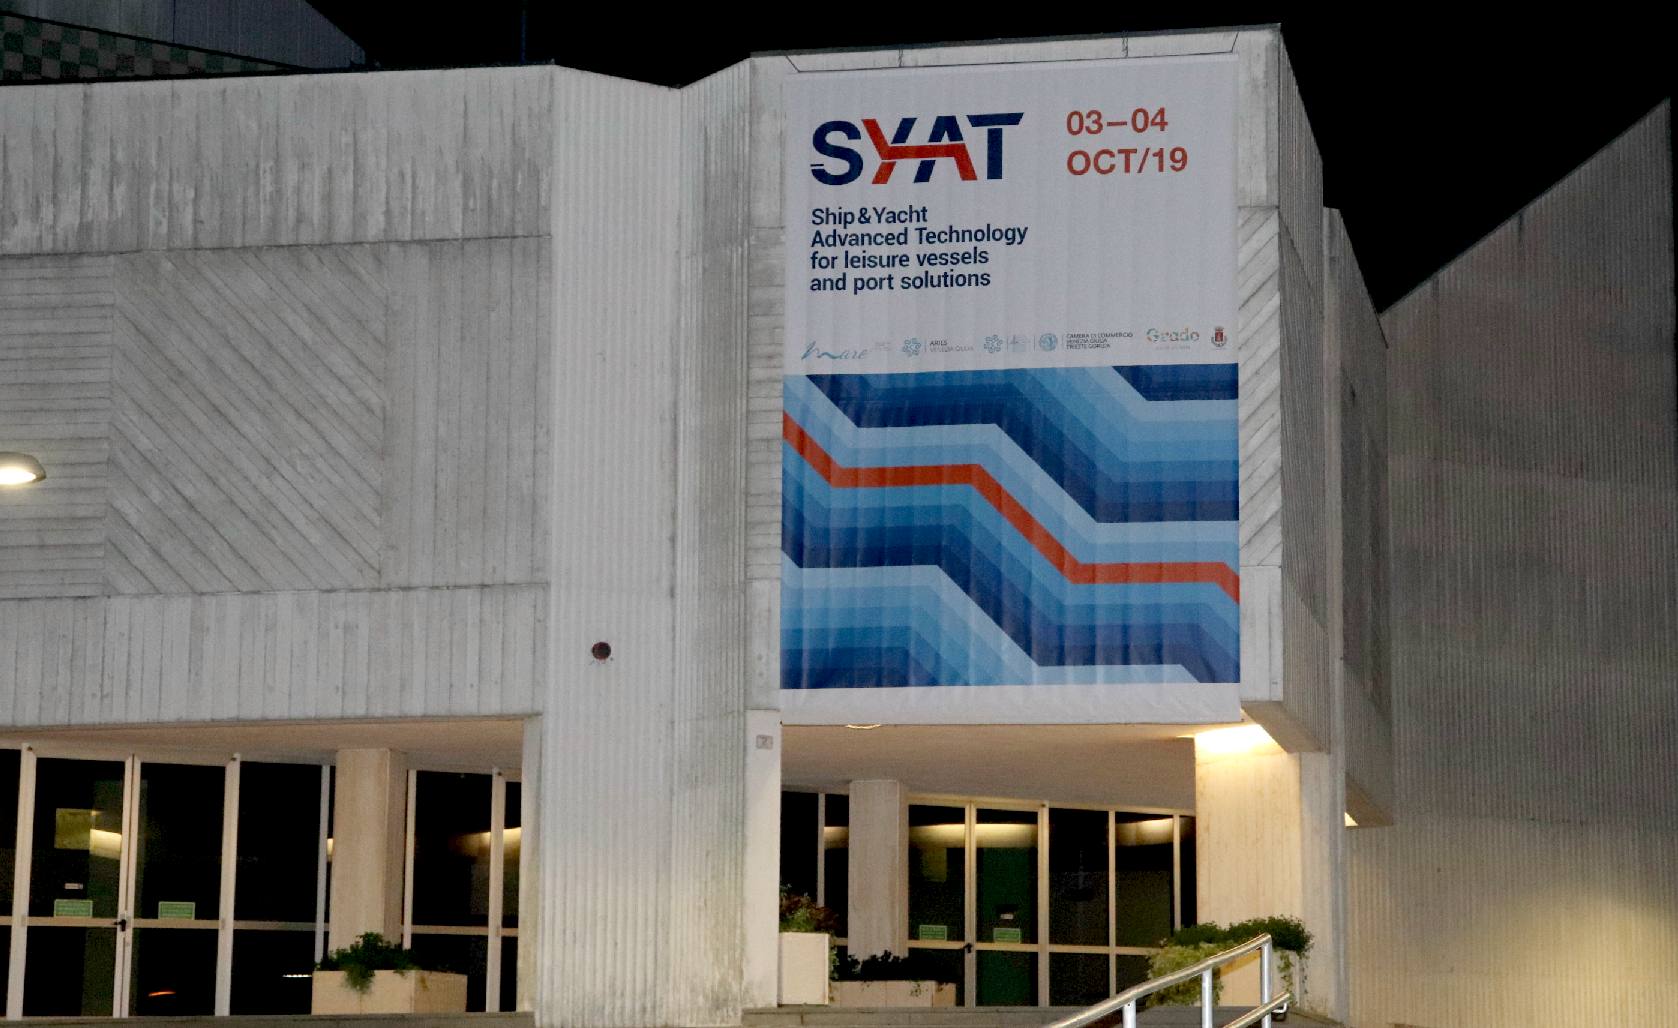 The SYAT conference building in Grado, advanced leisure vessels and port solutions